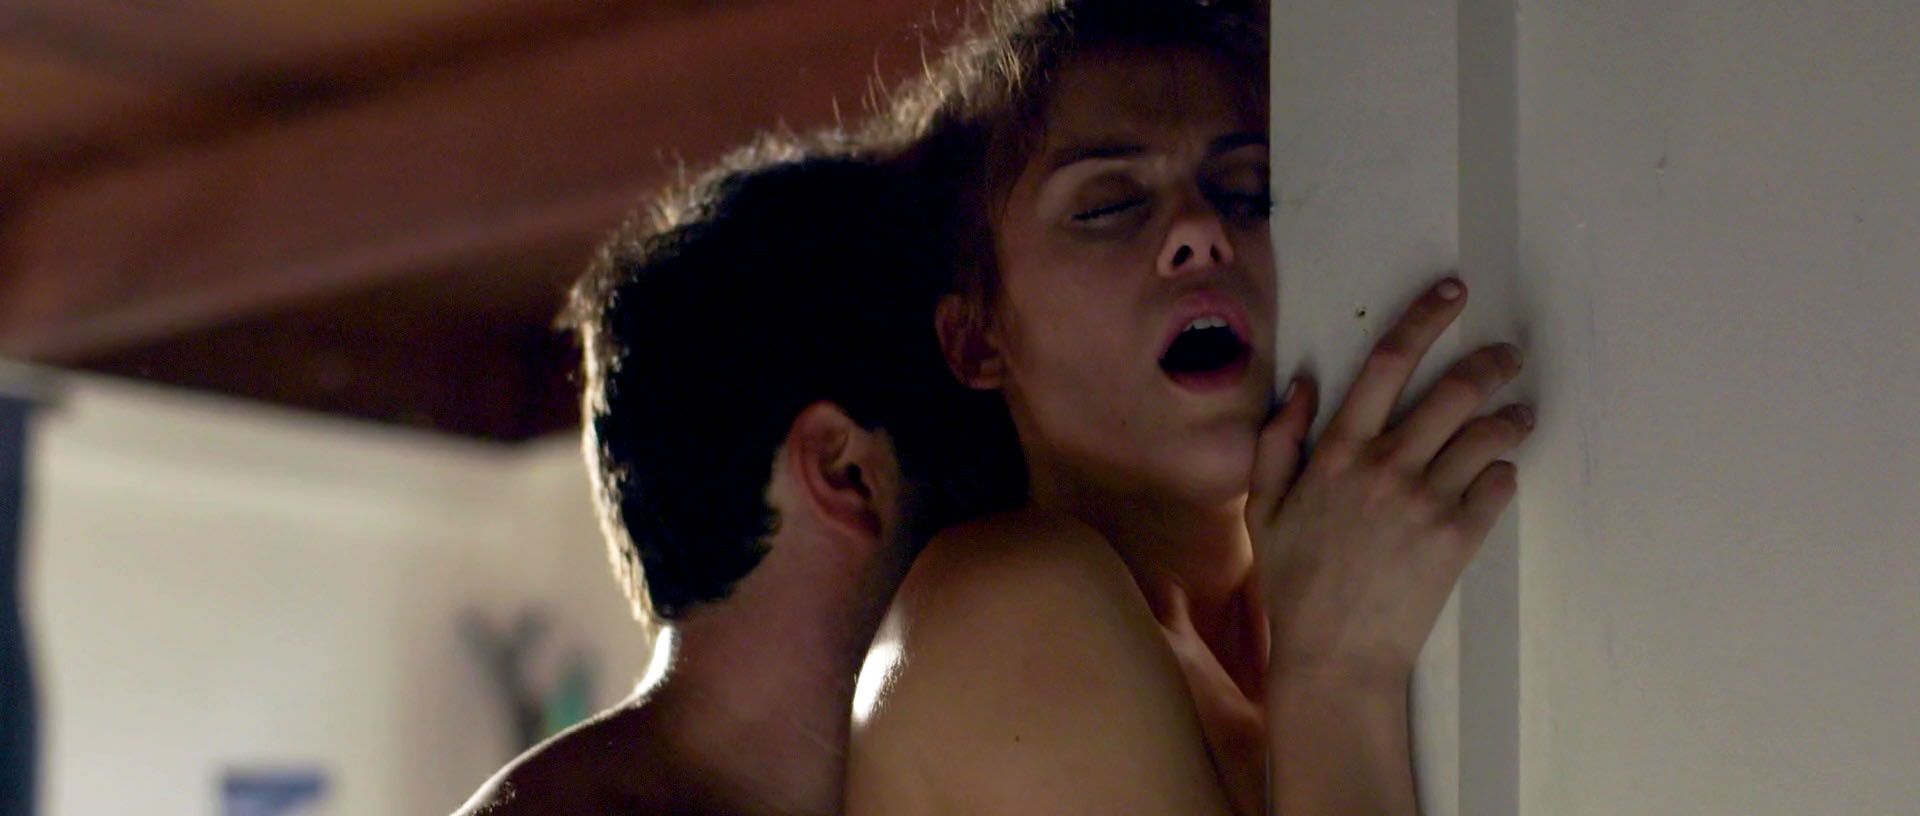 Lindsey Shaw Nude - Temps (2016) HD 1080p #TheFappening.